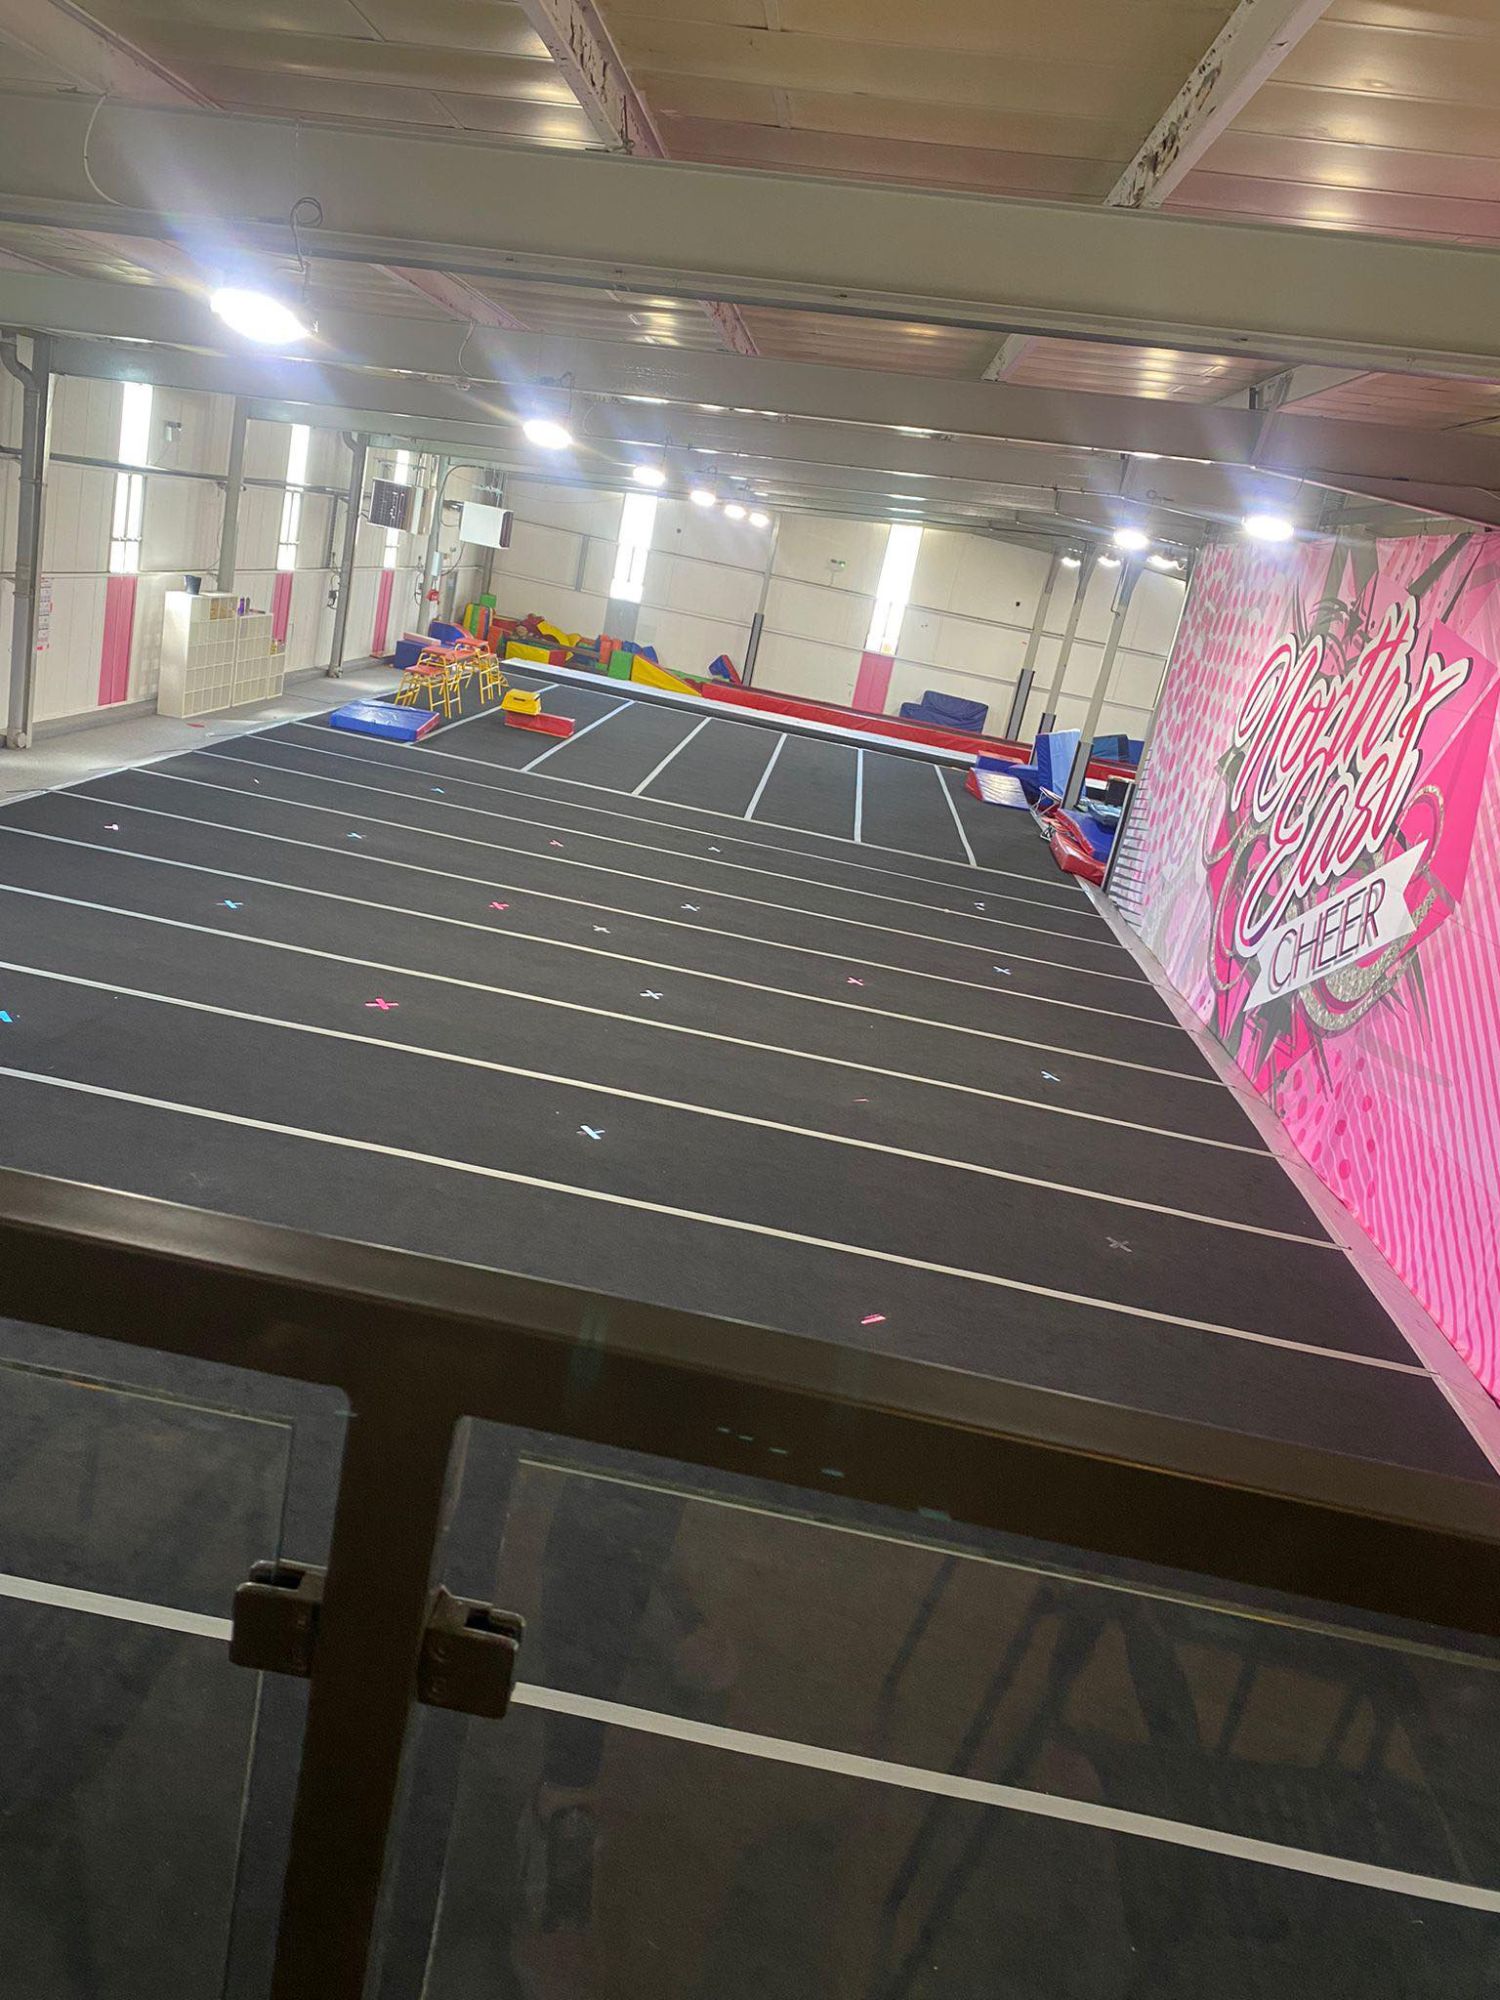 The cheer and gymnastics space.